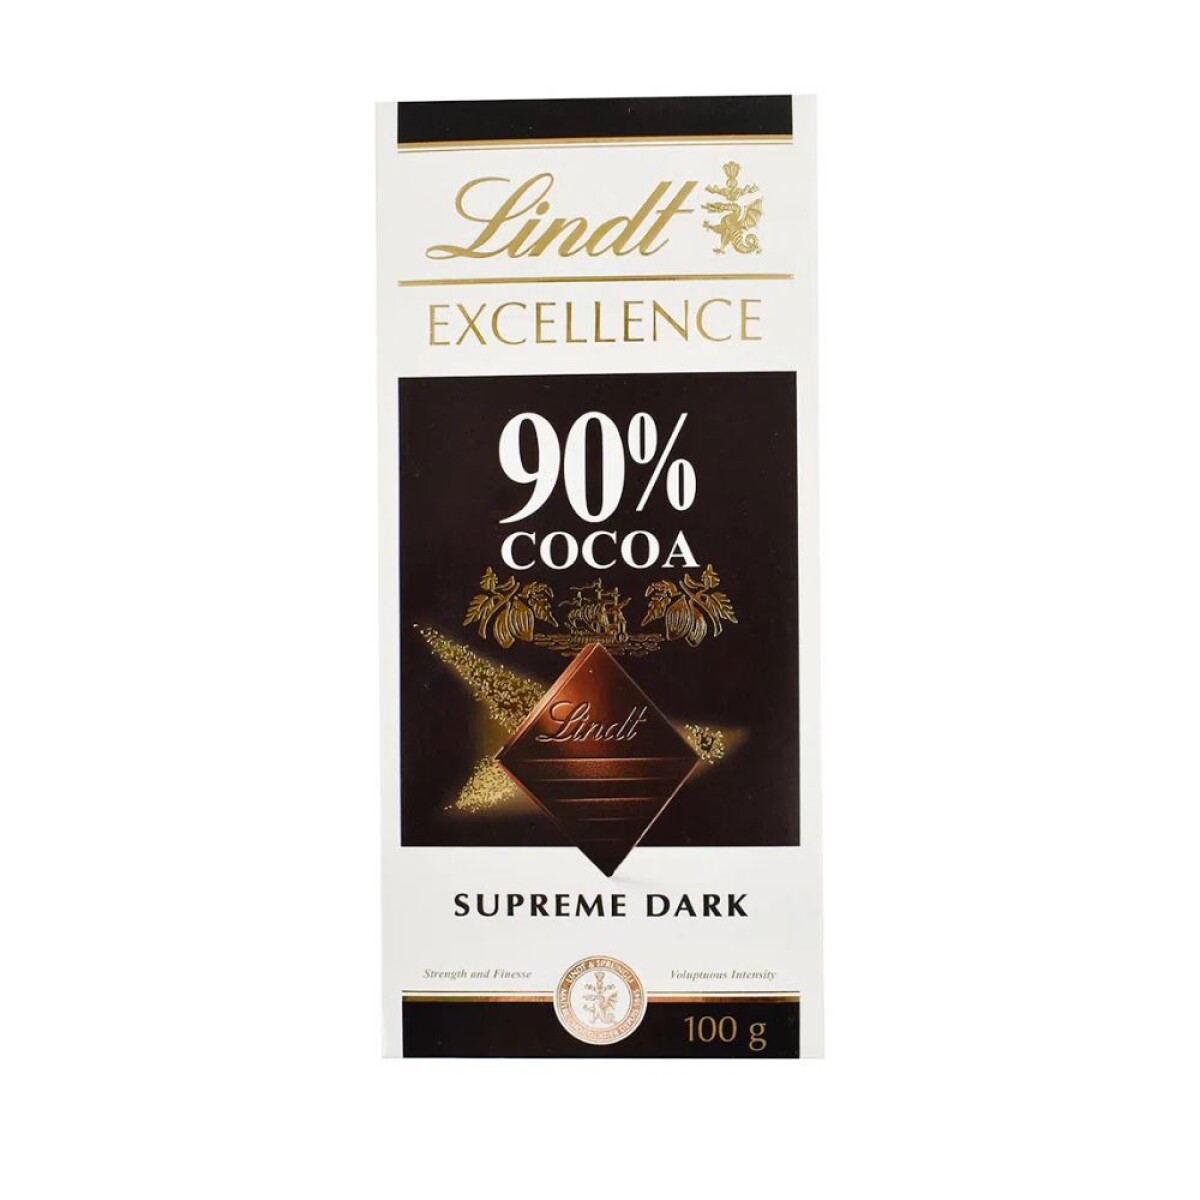 Chocolate Supreme Dark 90% Cacao Linde Excellence 100g 